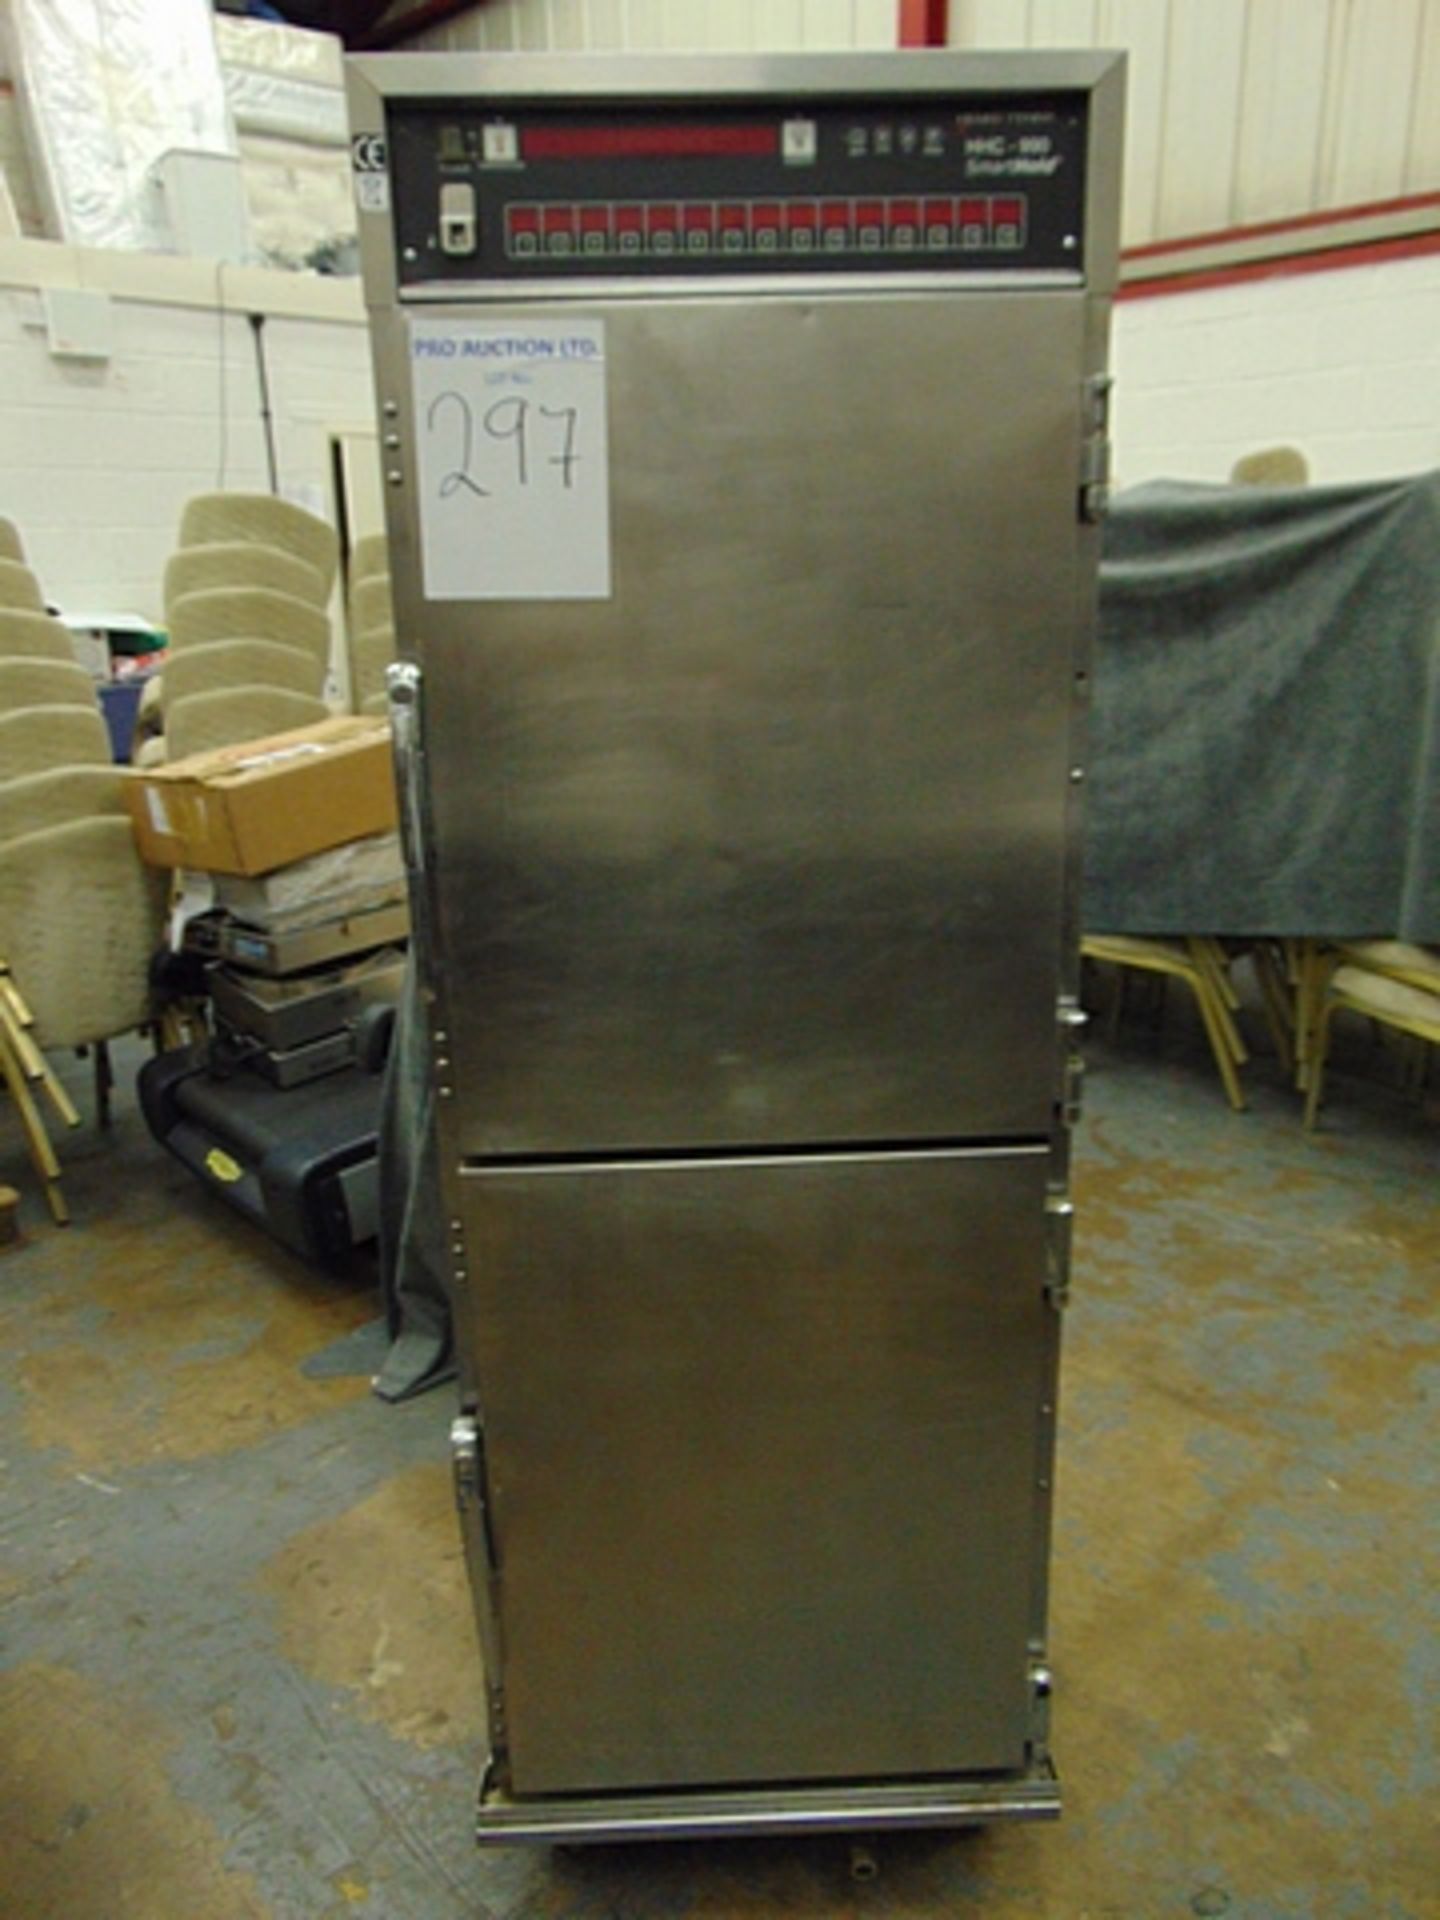 Henny Penny HHC-990 heated humidified holding cabinets 5 digital countdown timers allow you to